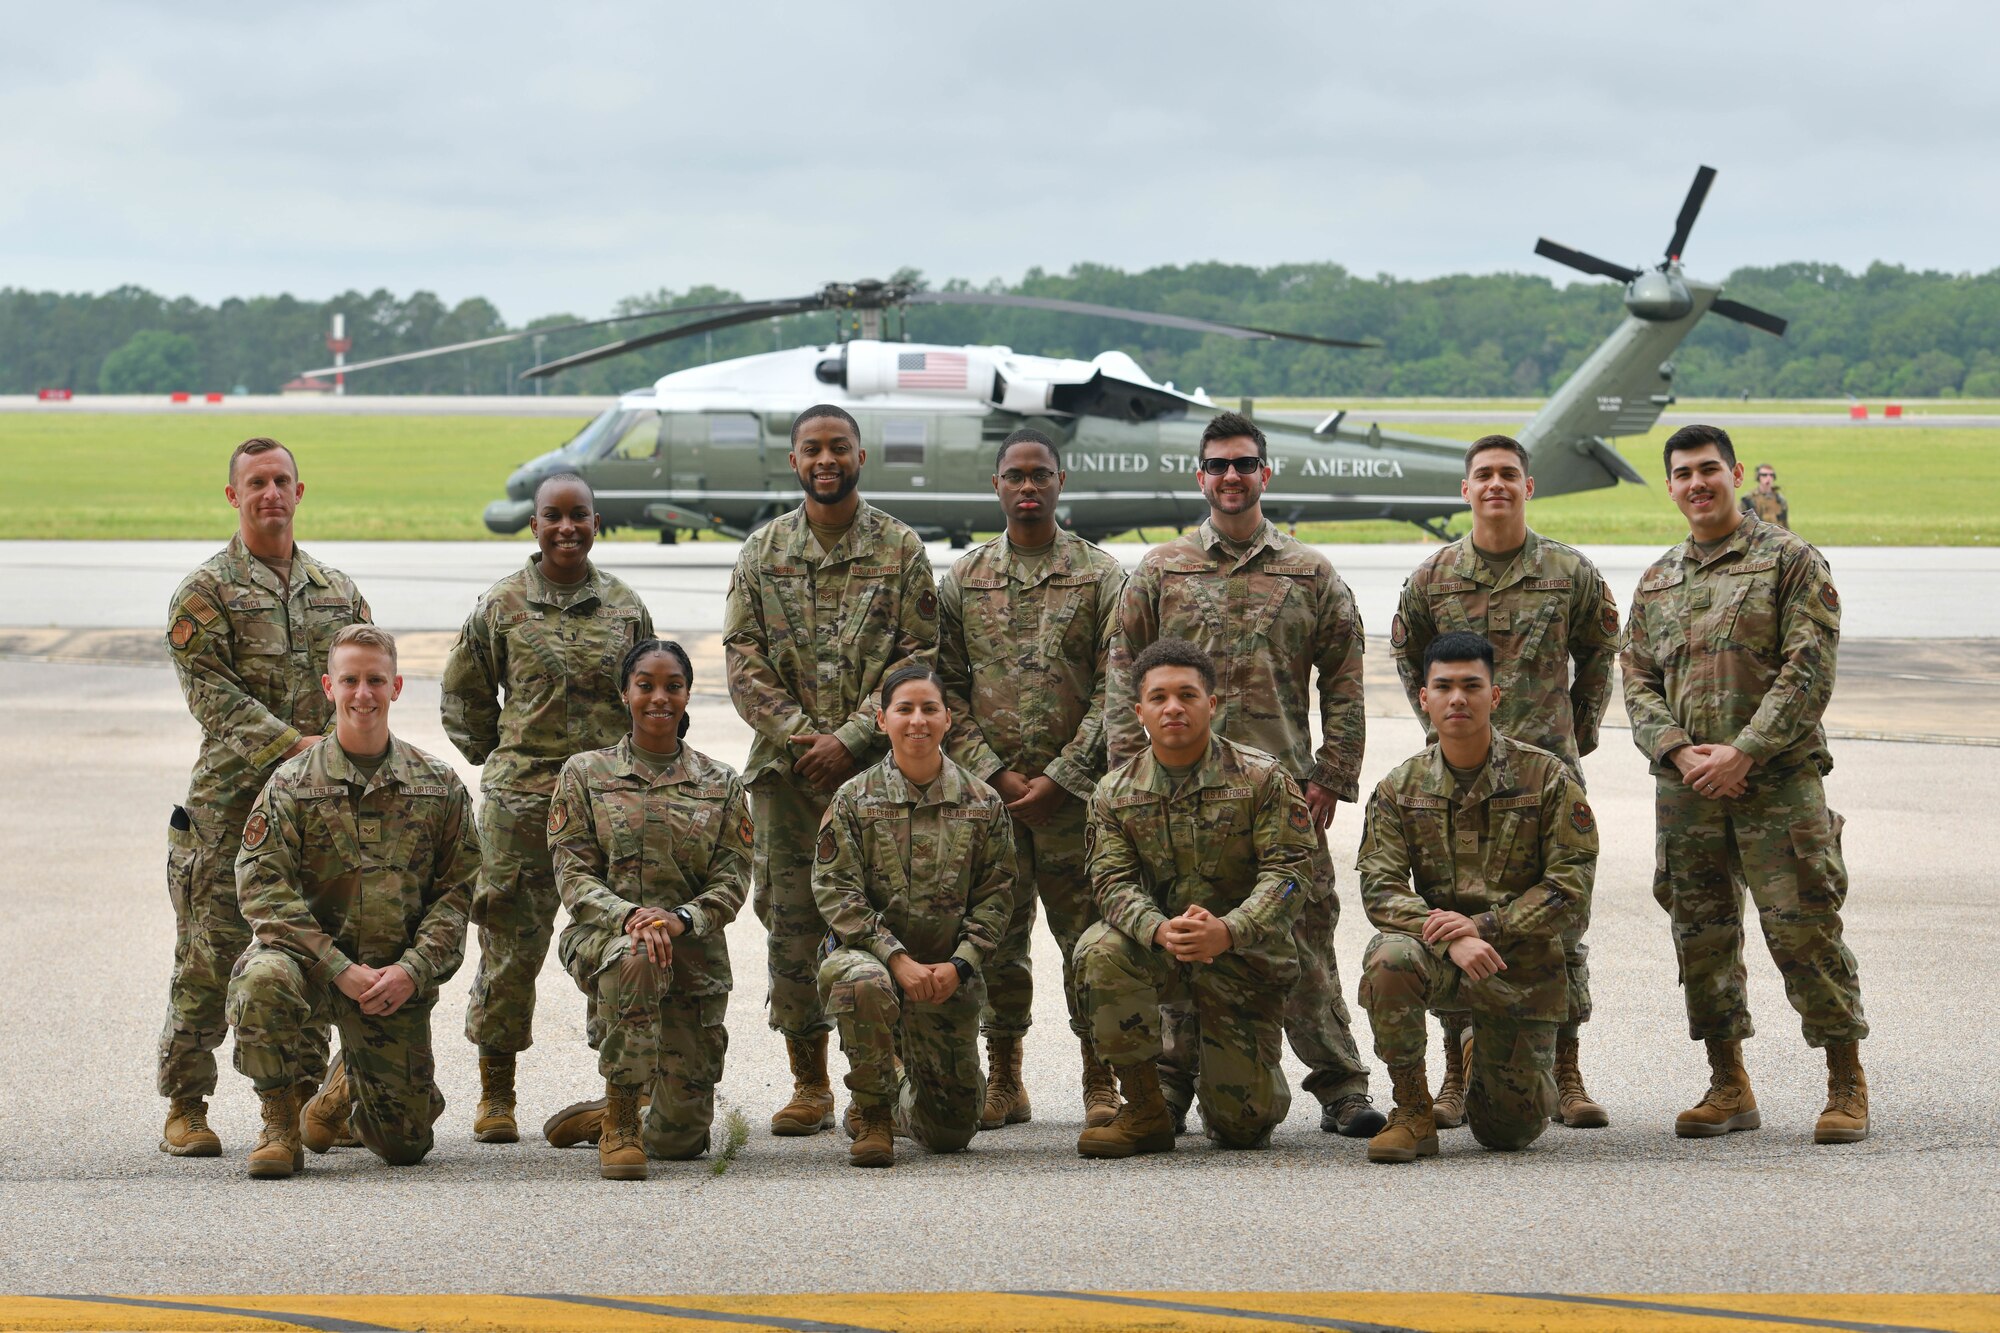 Maxwell-Gunter Airmen pose for a photo in front of a VH-60N "White Hawk" helicopter on Maxwell Air Force Base, Alabama, May 2, 2022. The Airmen were offered an incentive flight for exemplary performance and had the opportunity to ride in a Marine Corps MV-22B "Osprey". (U.S. Air Force photo by Senior Airman Jackson Manske)